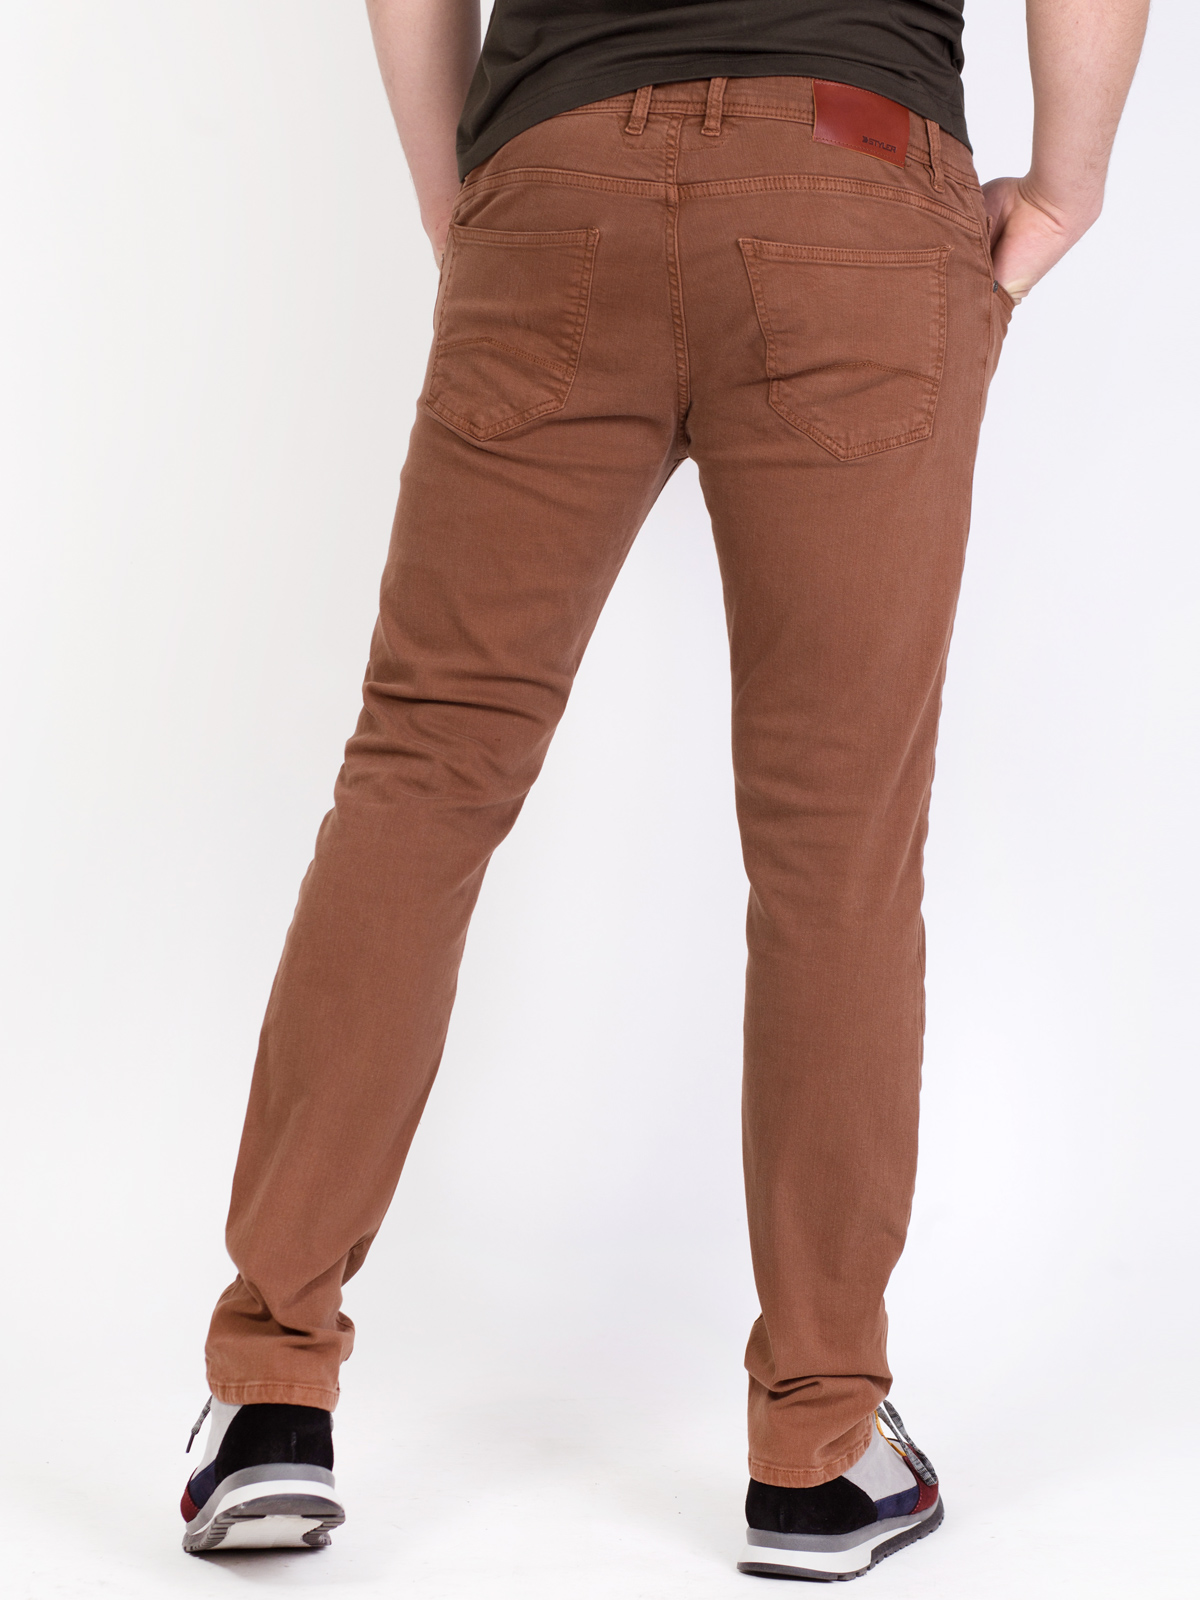 Sports jeans in camel color - 62154 € 44.43 img4